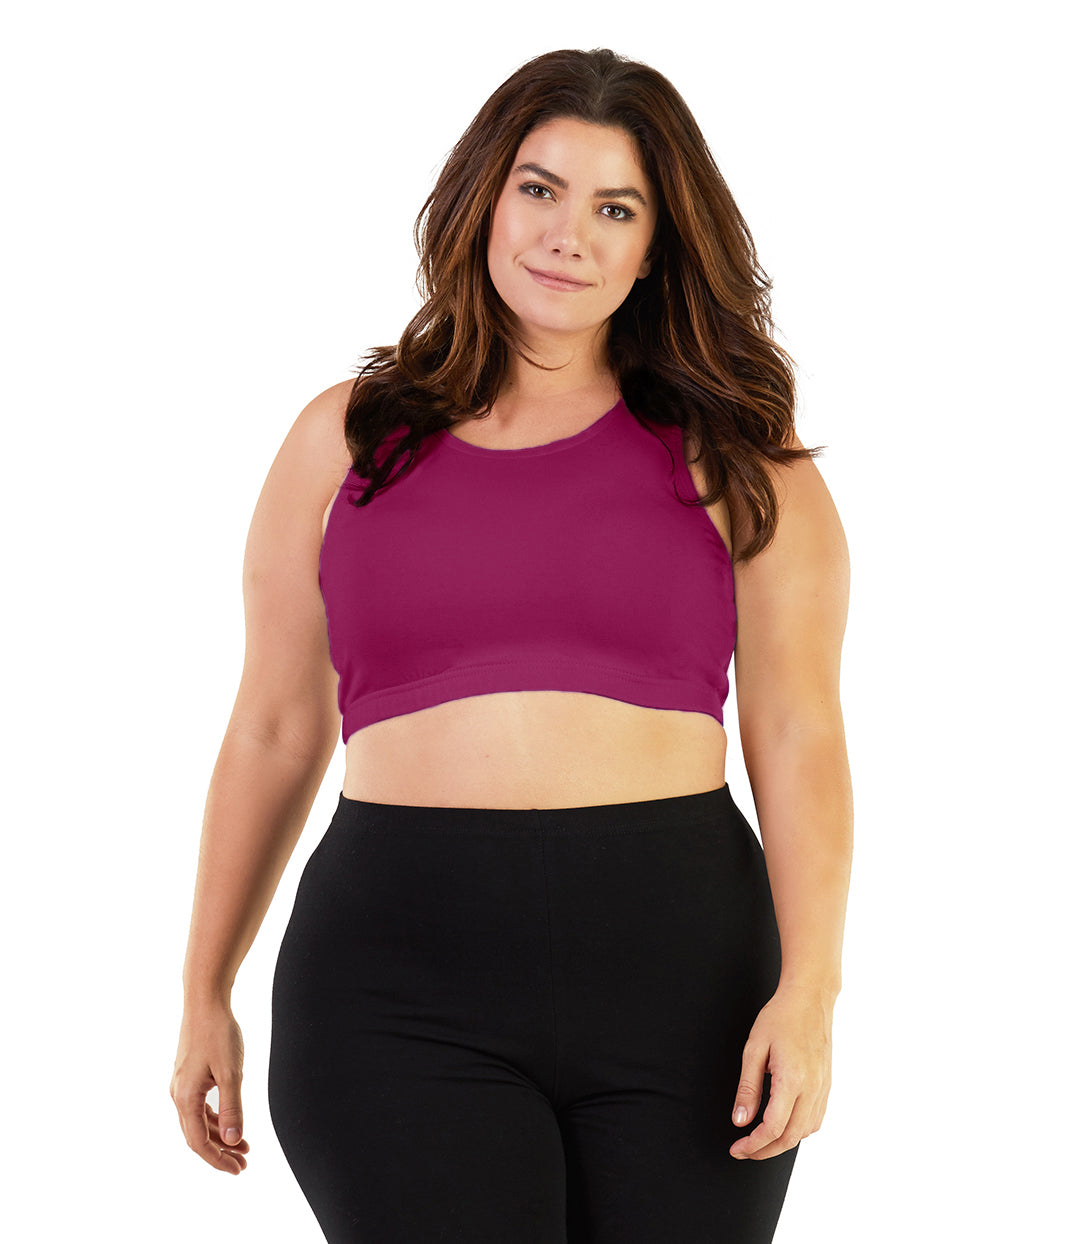 Plus size woman, facing front, wearing JunoActive plus size Stretch Naturals Scoop Neck Bra in Merlot. The woman is wearing black plus size JunoActive leggings. Her arms fall naturally to her side.